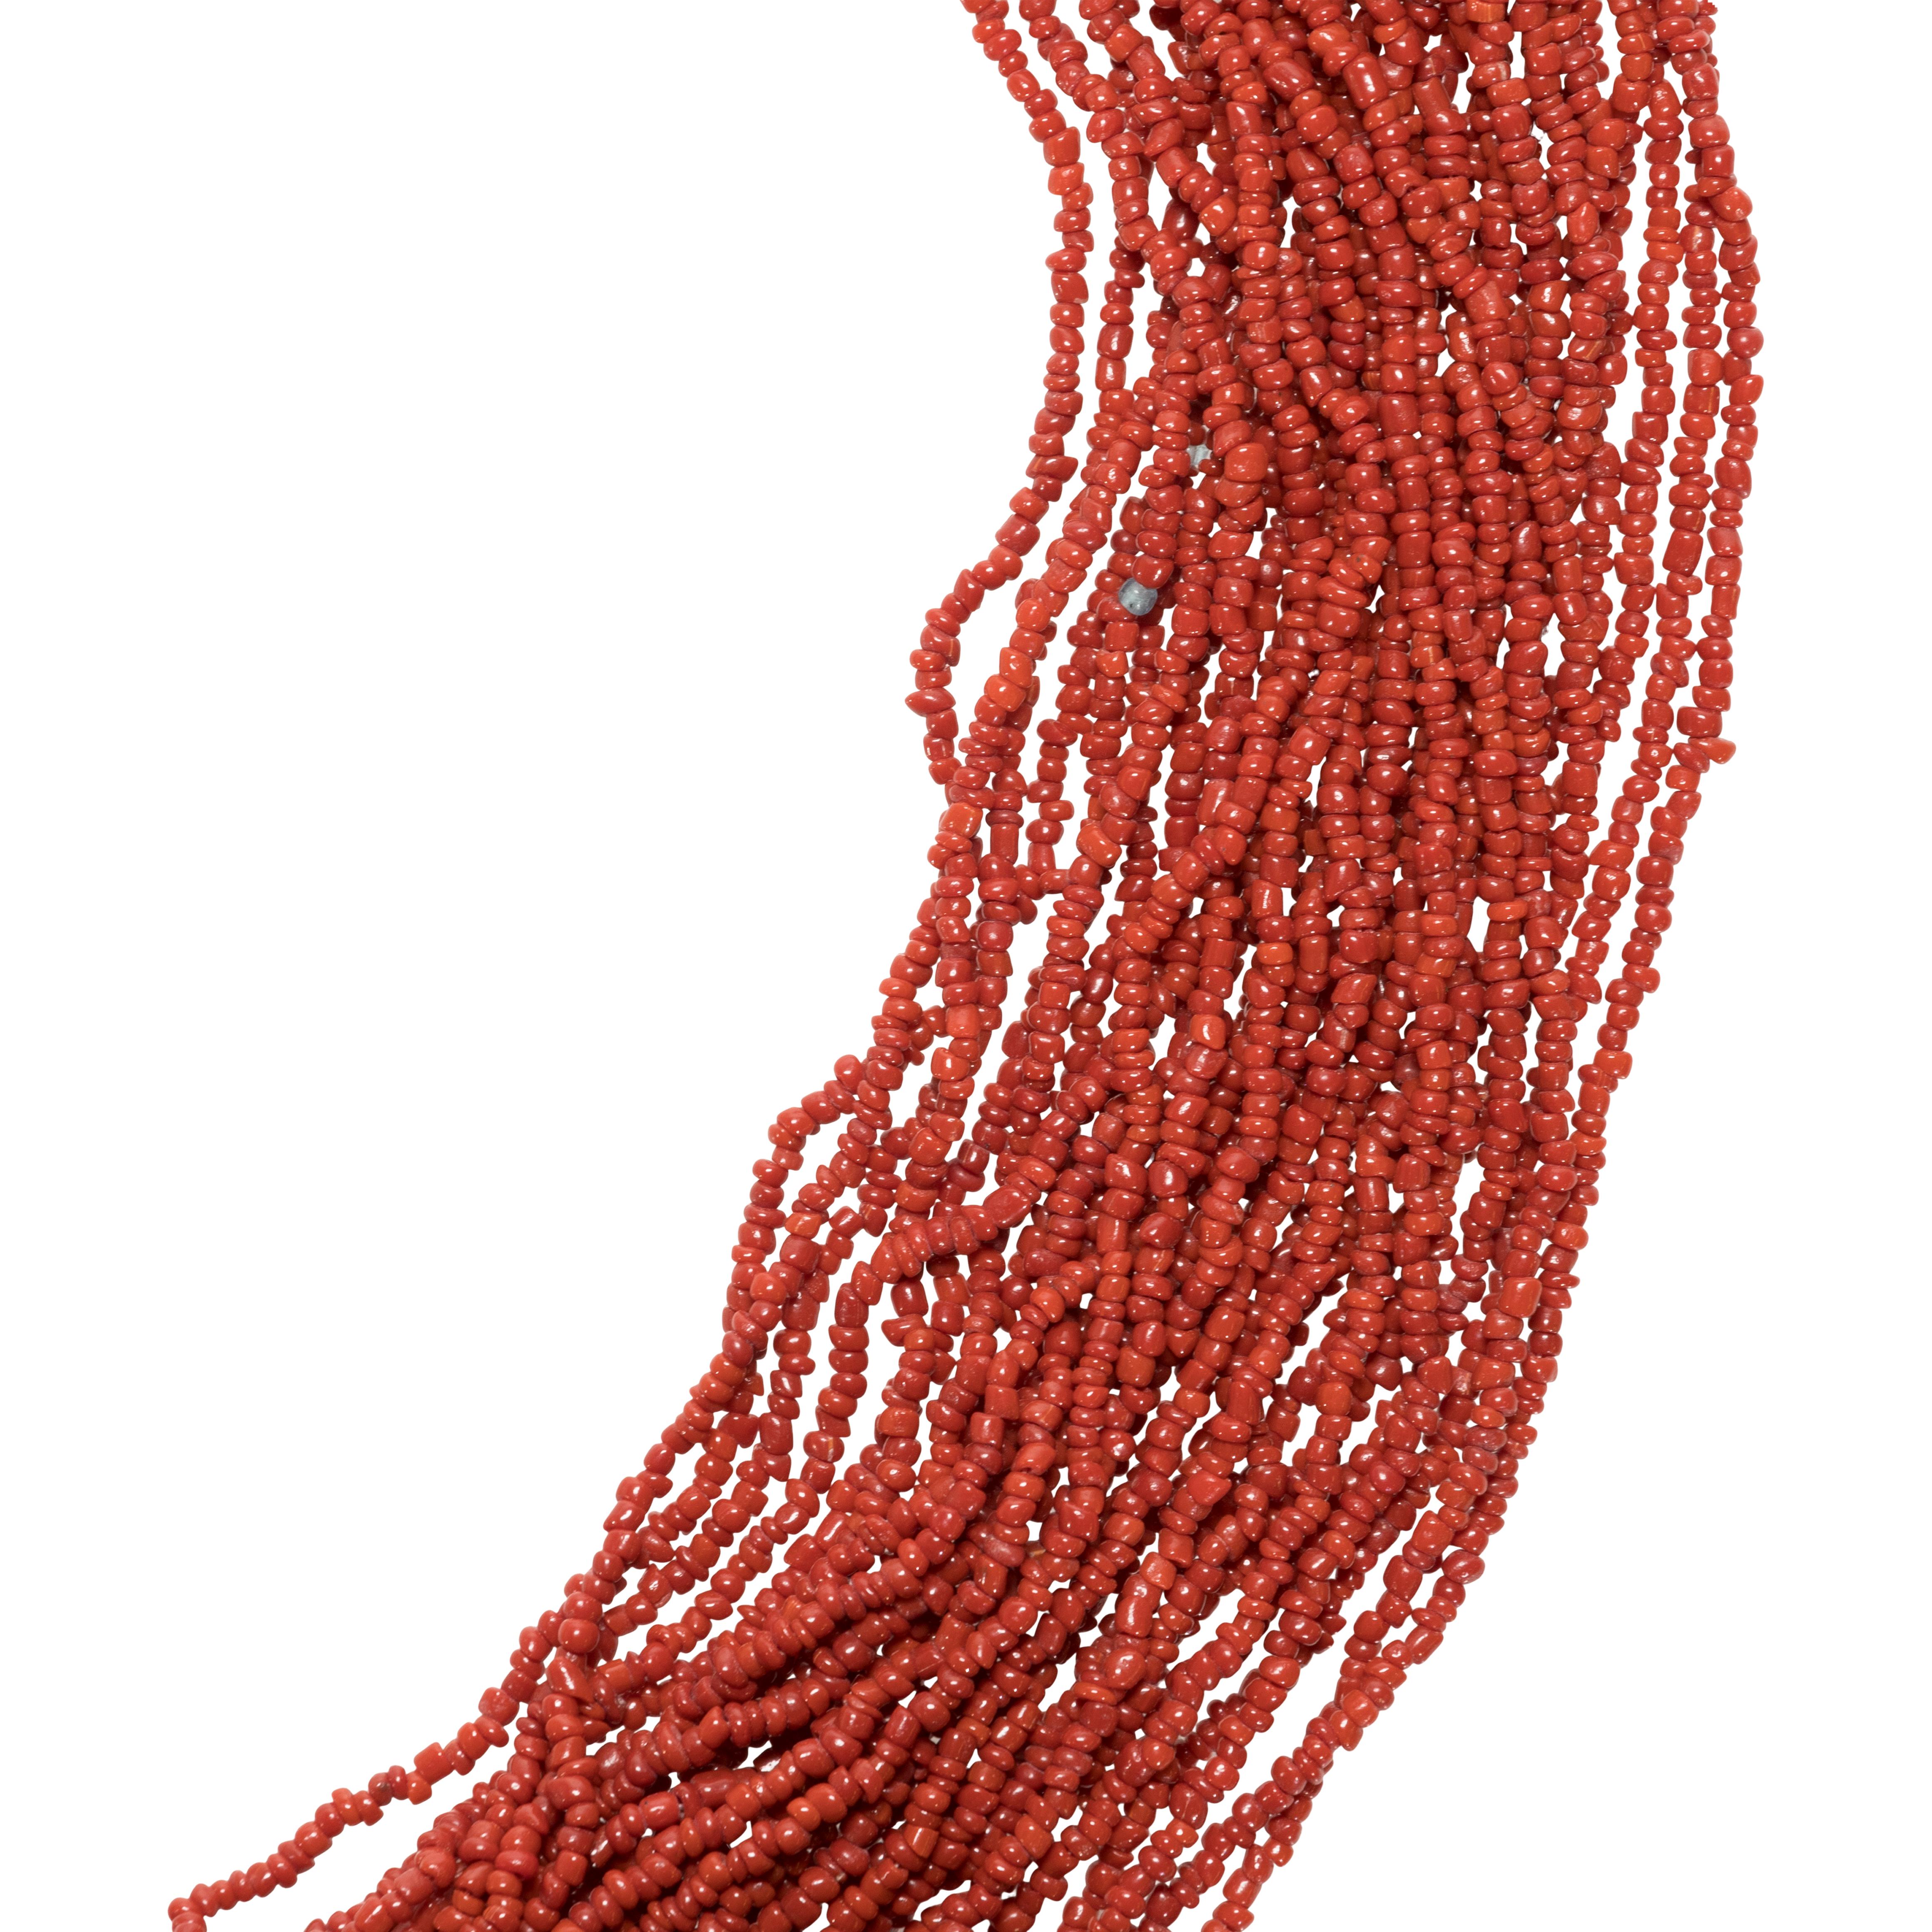 Zuni multi strand red coral seed bead necklace. Features 30 strands of oxblood colored coral, seed beads and a sterling silver hook and eye clasp.

PERIOD: Contemporary

ORIGIN: Southwest - Zuni, Native American

SIZE: 244 grams; 26